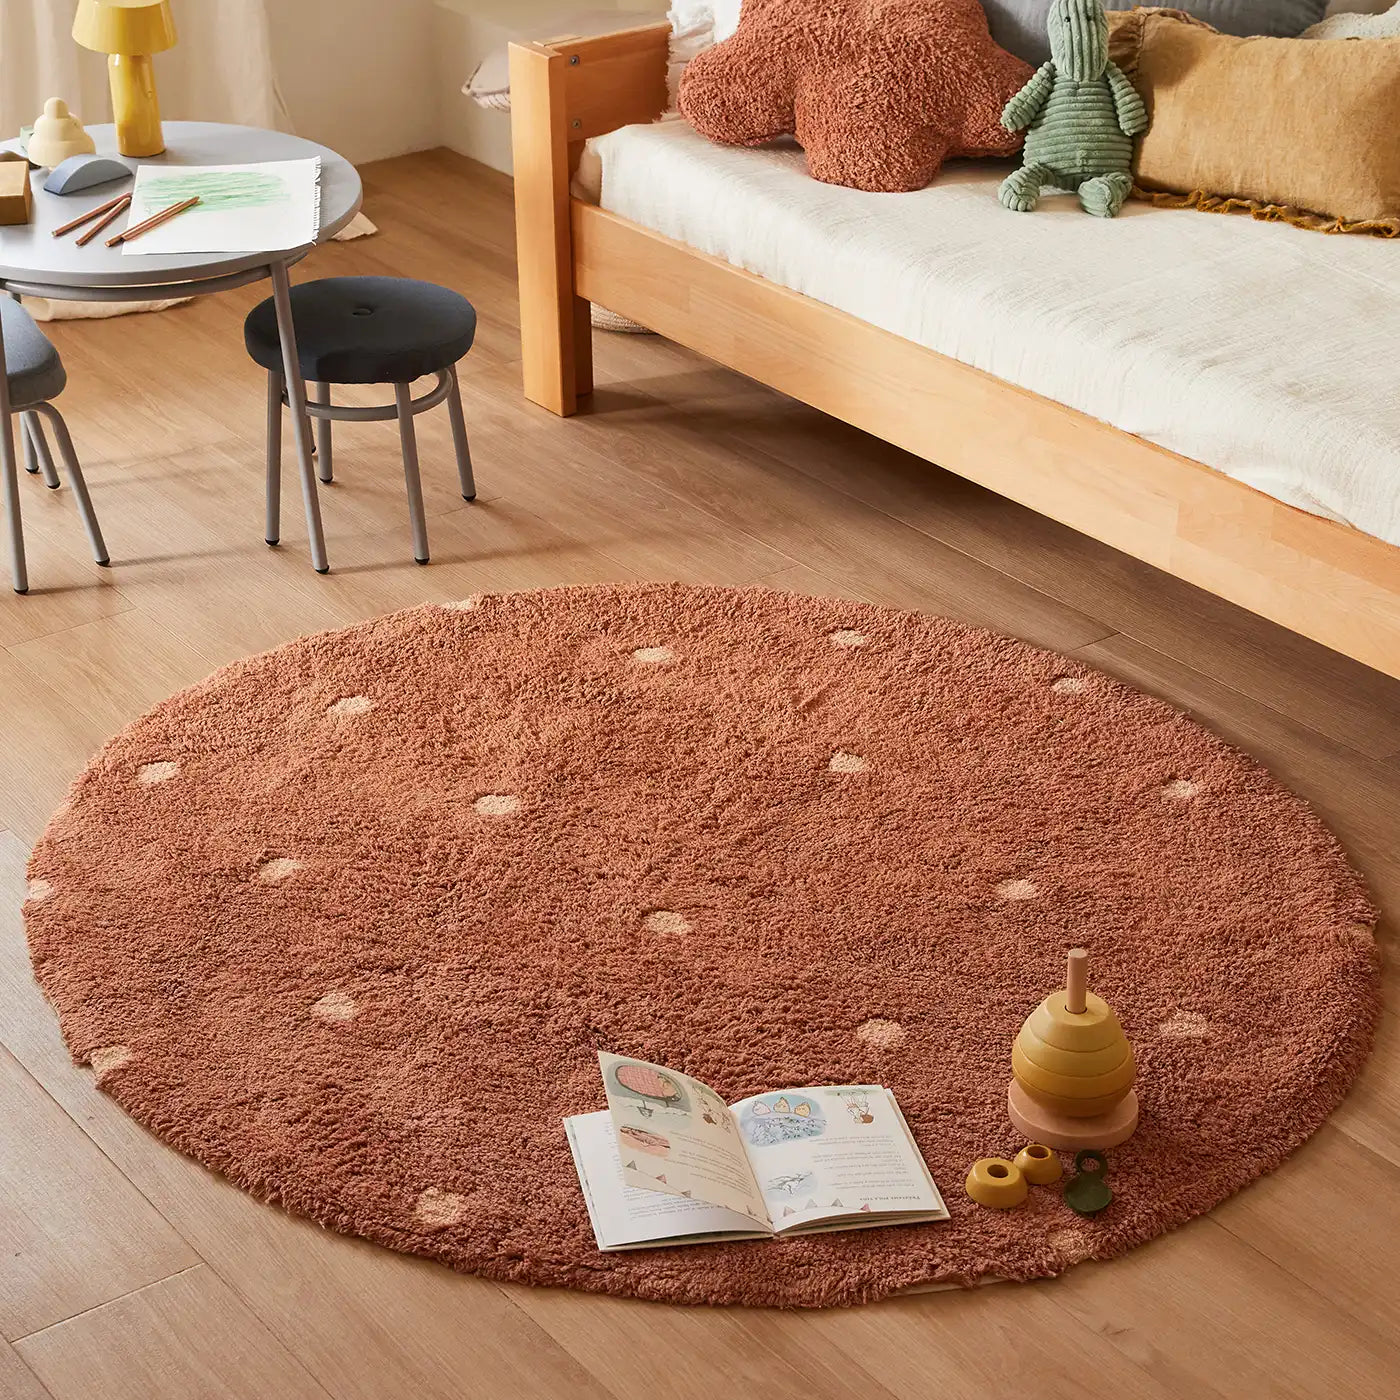 Lorena Canals Round Dot Washable Rug - Chestnut (Mushroom hunters / Forest finds Collection)